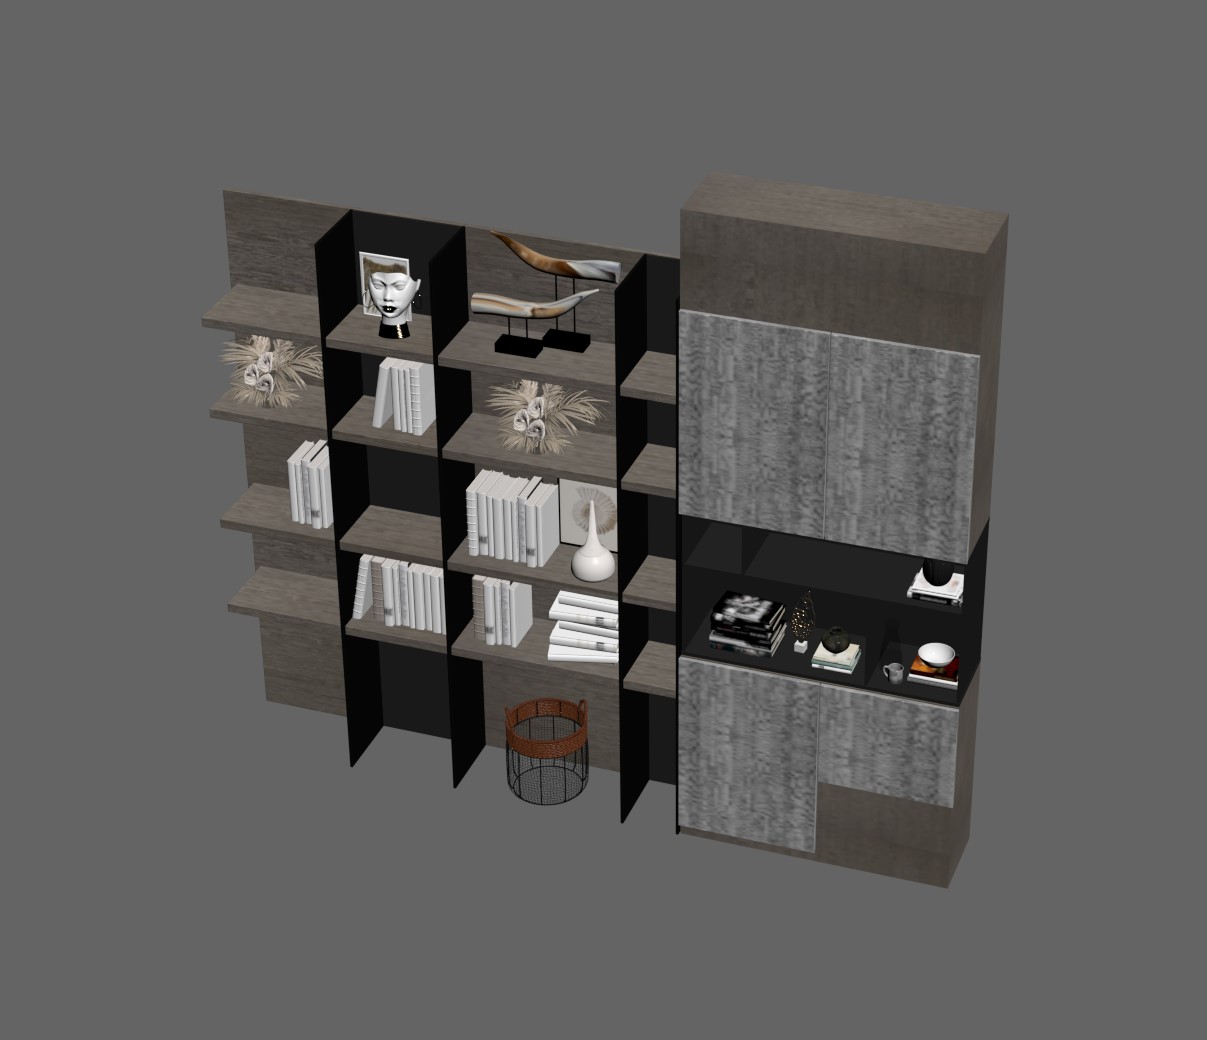 10236. Download Free Bookcase Model by Oi A Chun